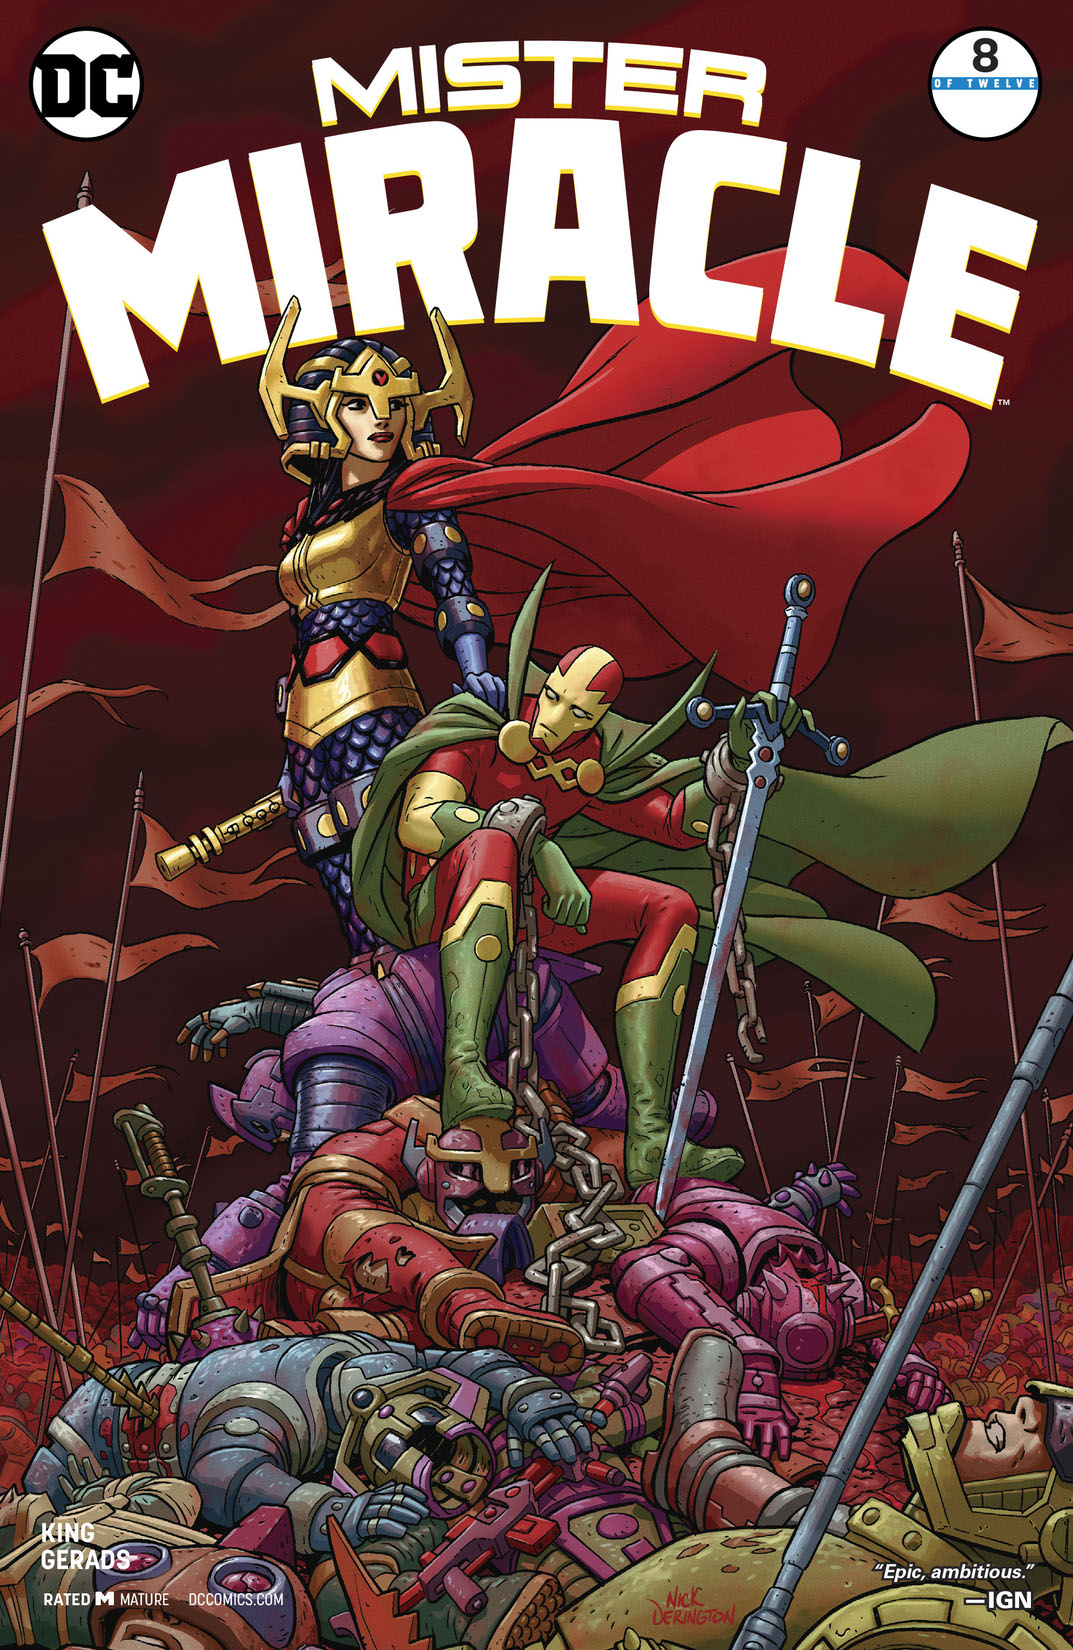 Mister Miracle (2017-) #8 preview images